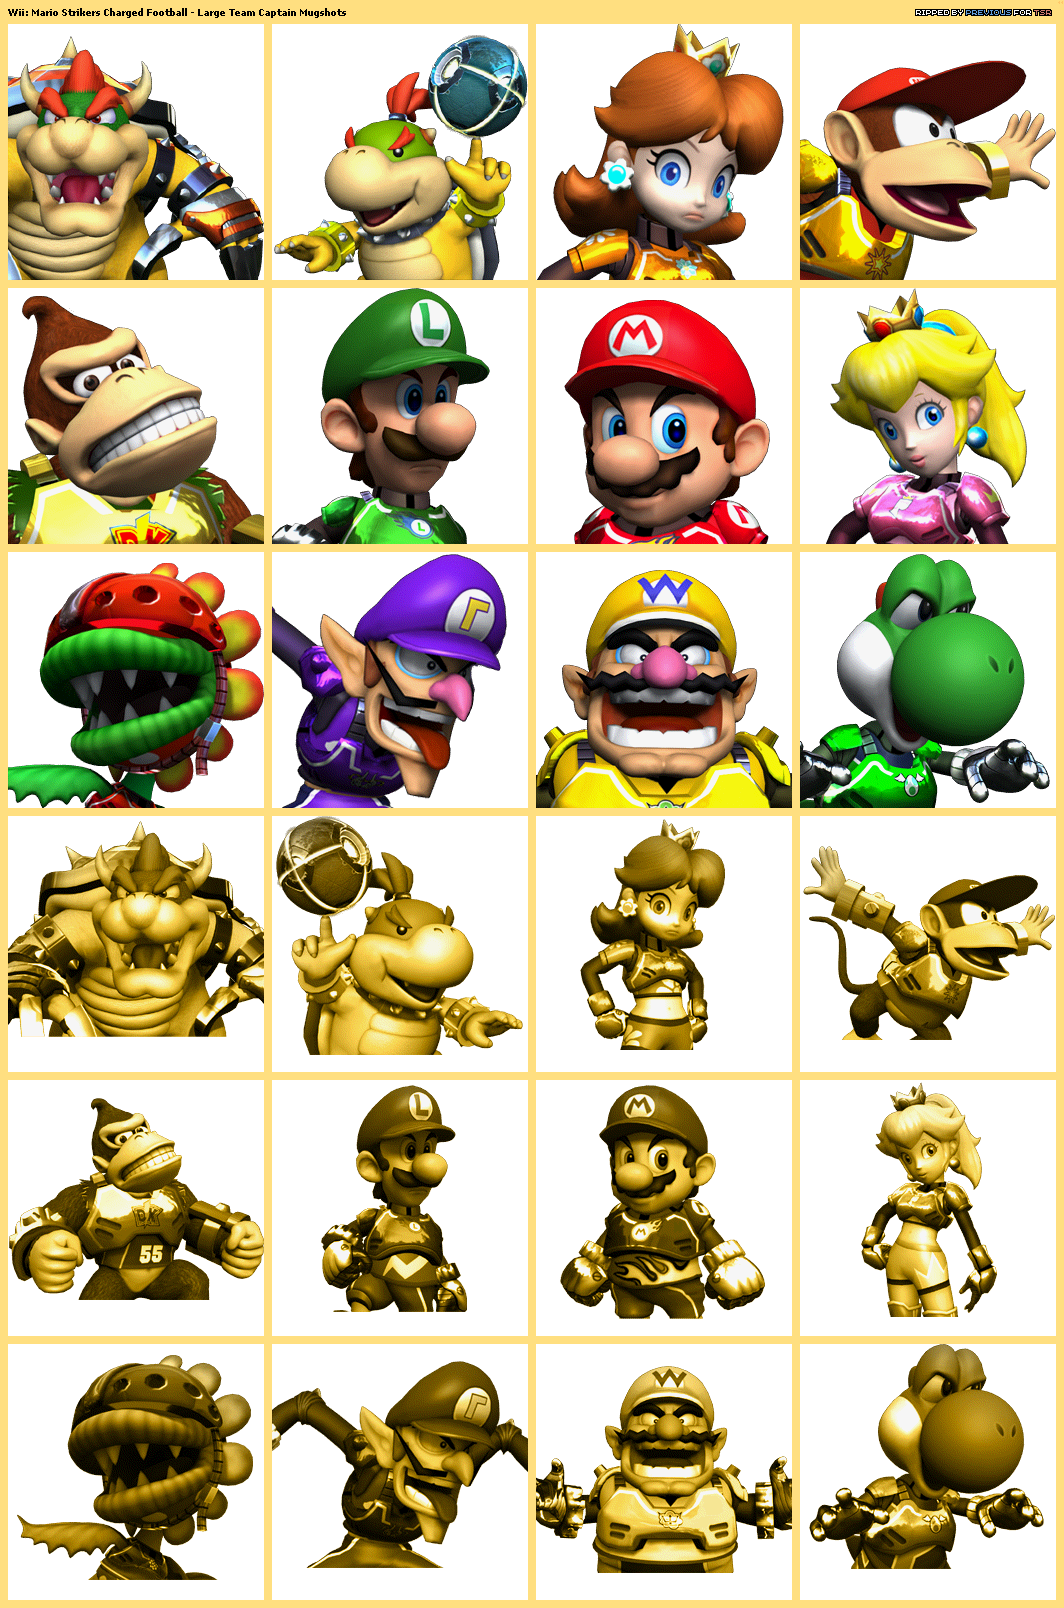 Mario Strikers Charged - Team Captain Mugshots (Large)